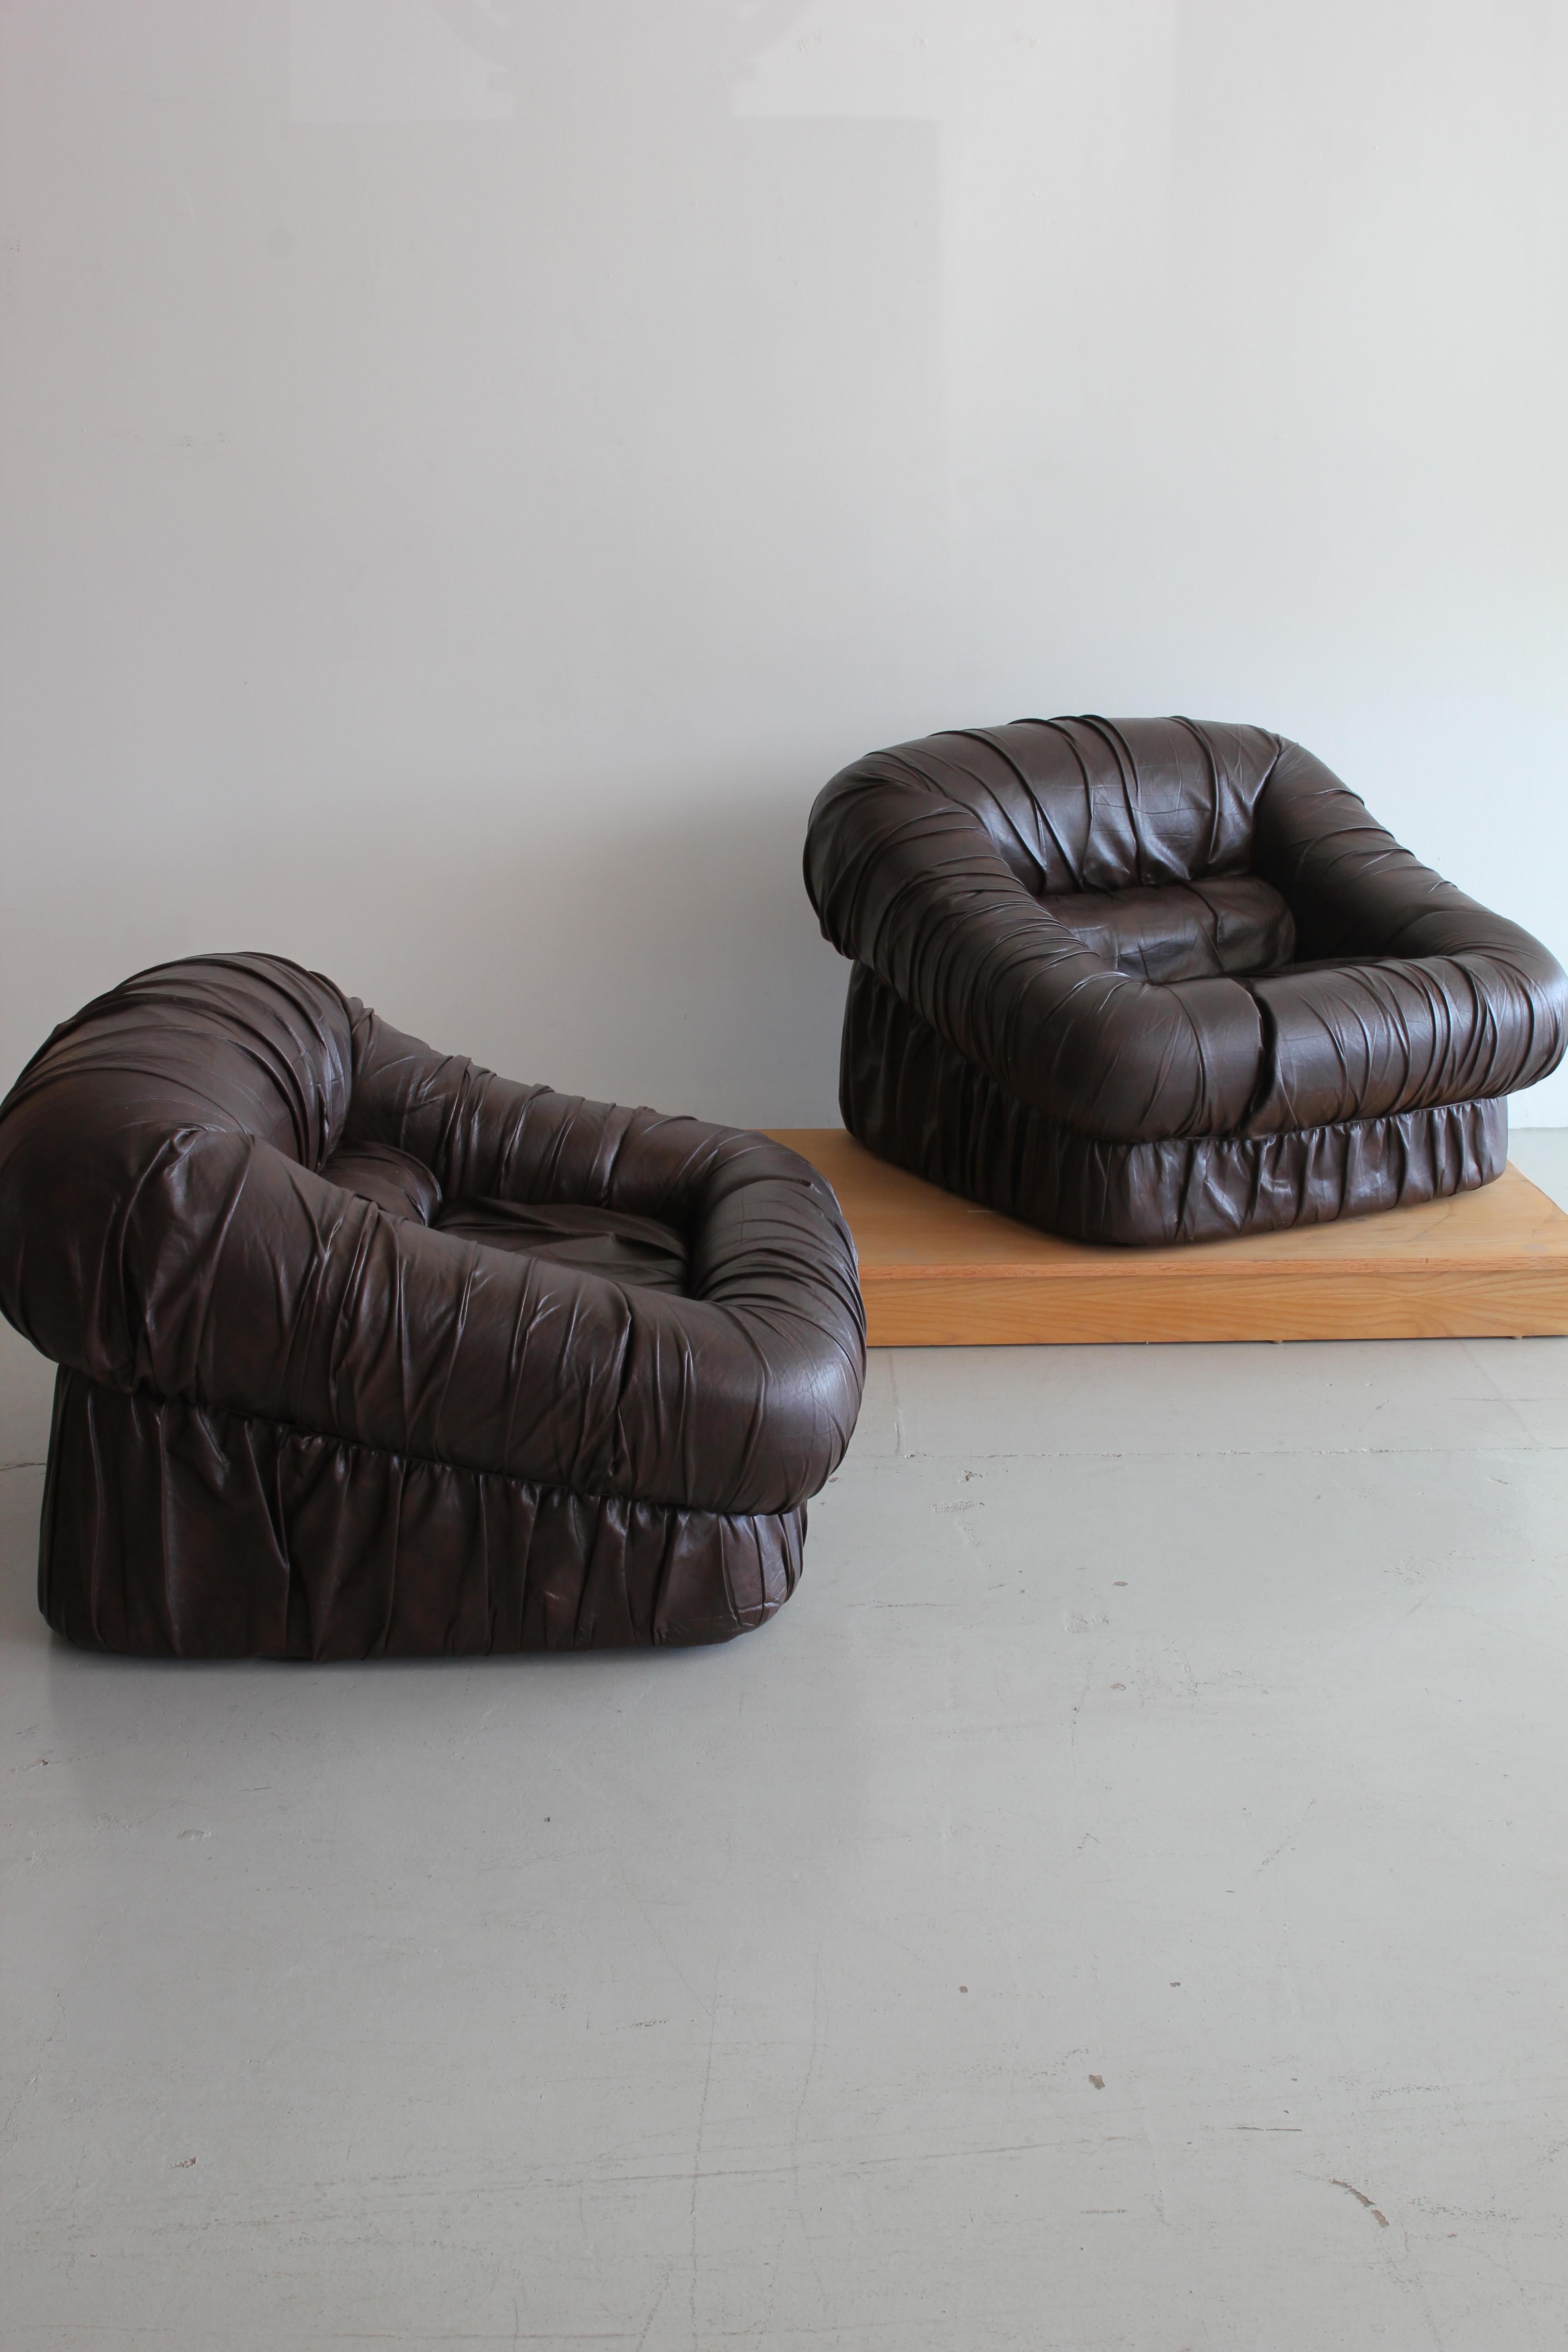 Wonderful pair of chairs in a soft chocolate brown Italian leather. 
Designed by Jonathan De Pas, Donato D'Urbino, and Paolo Lomazzi for the Italian firm Dell'Oca in 1970.
Fantastic shape and condition.